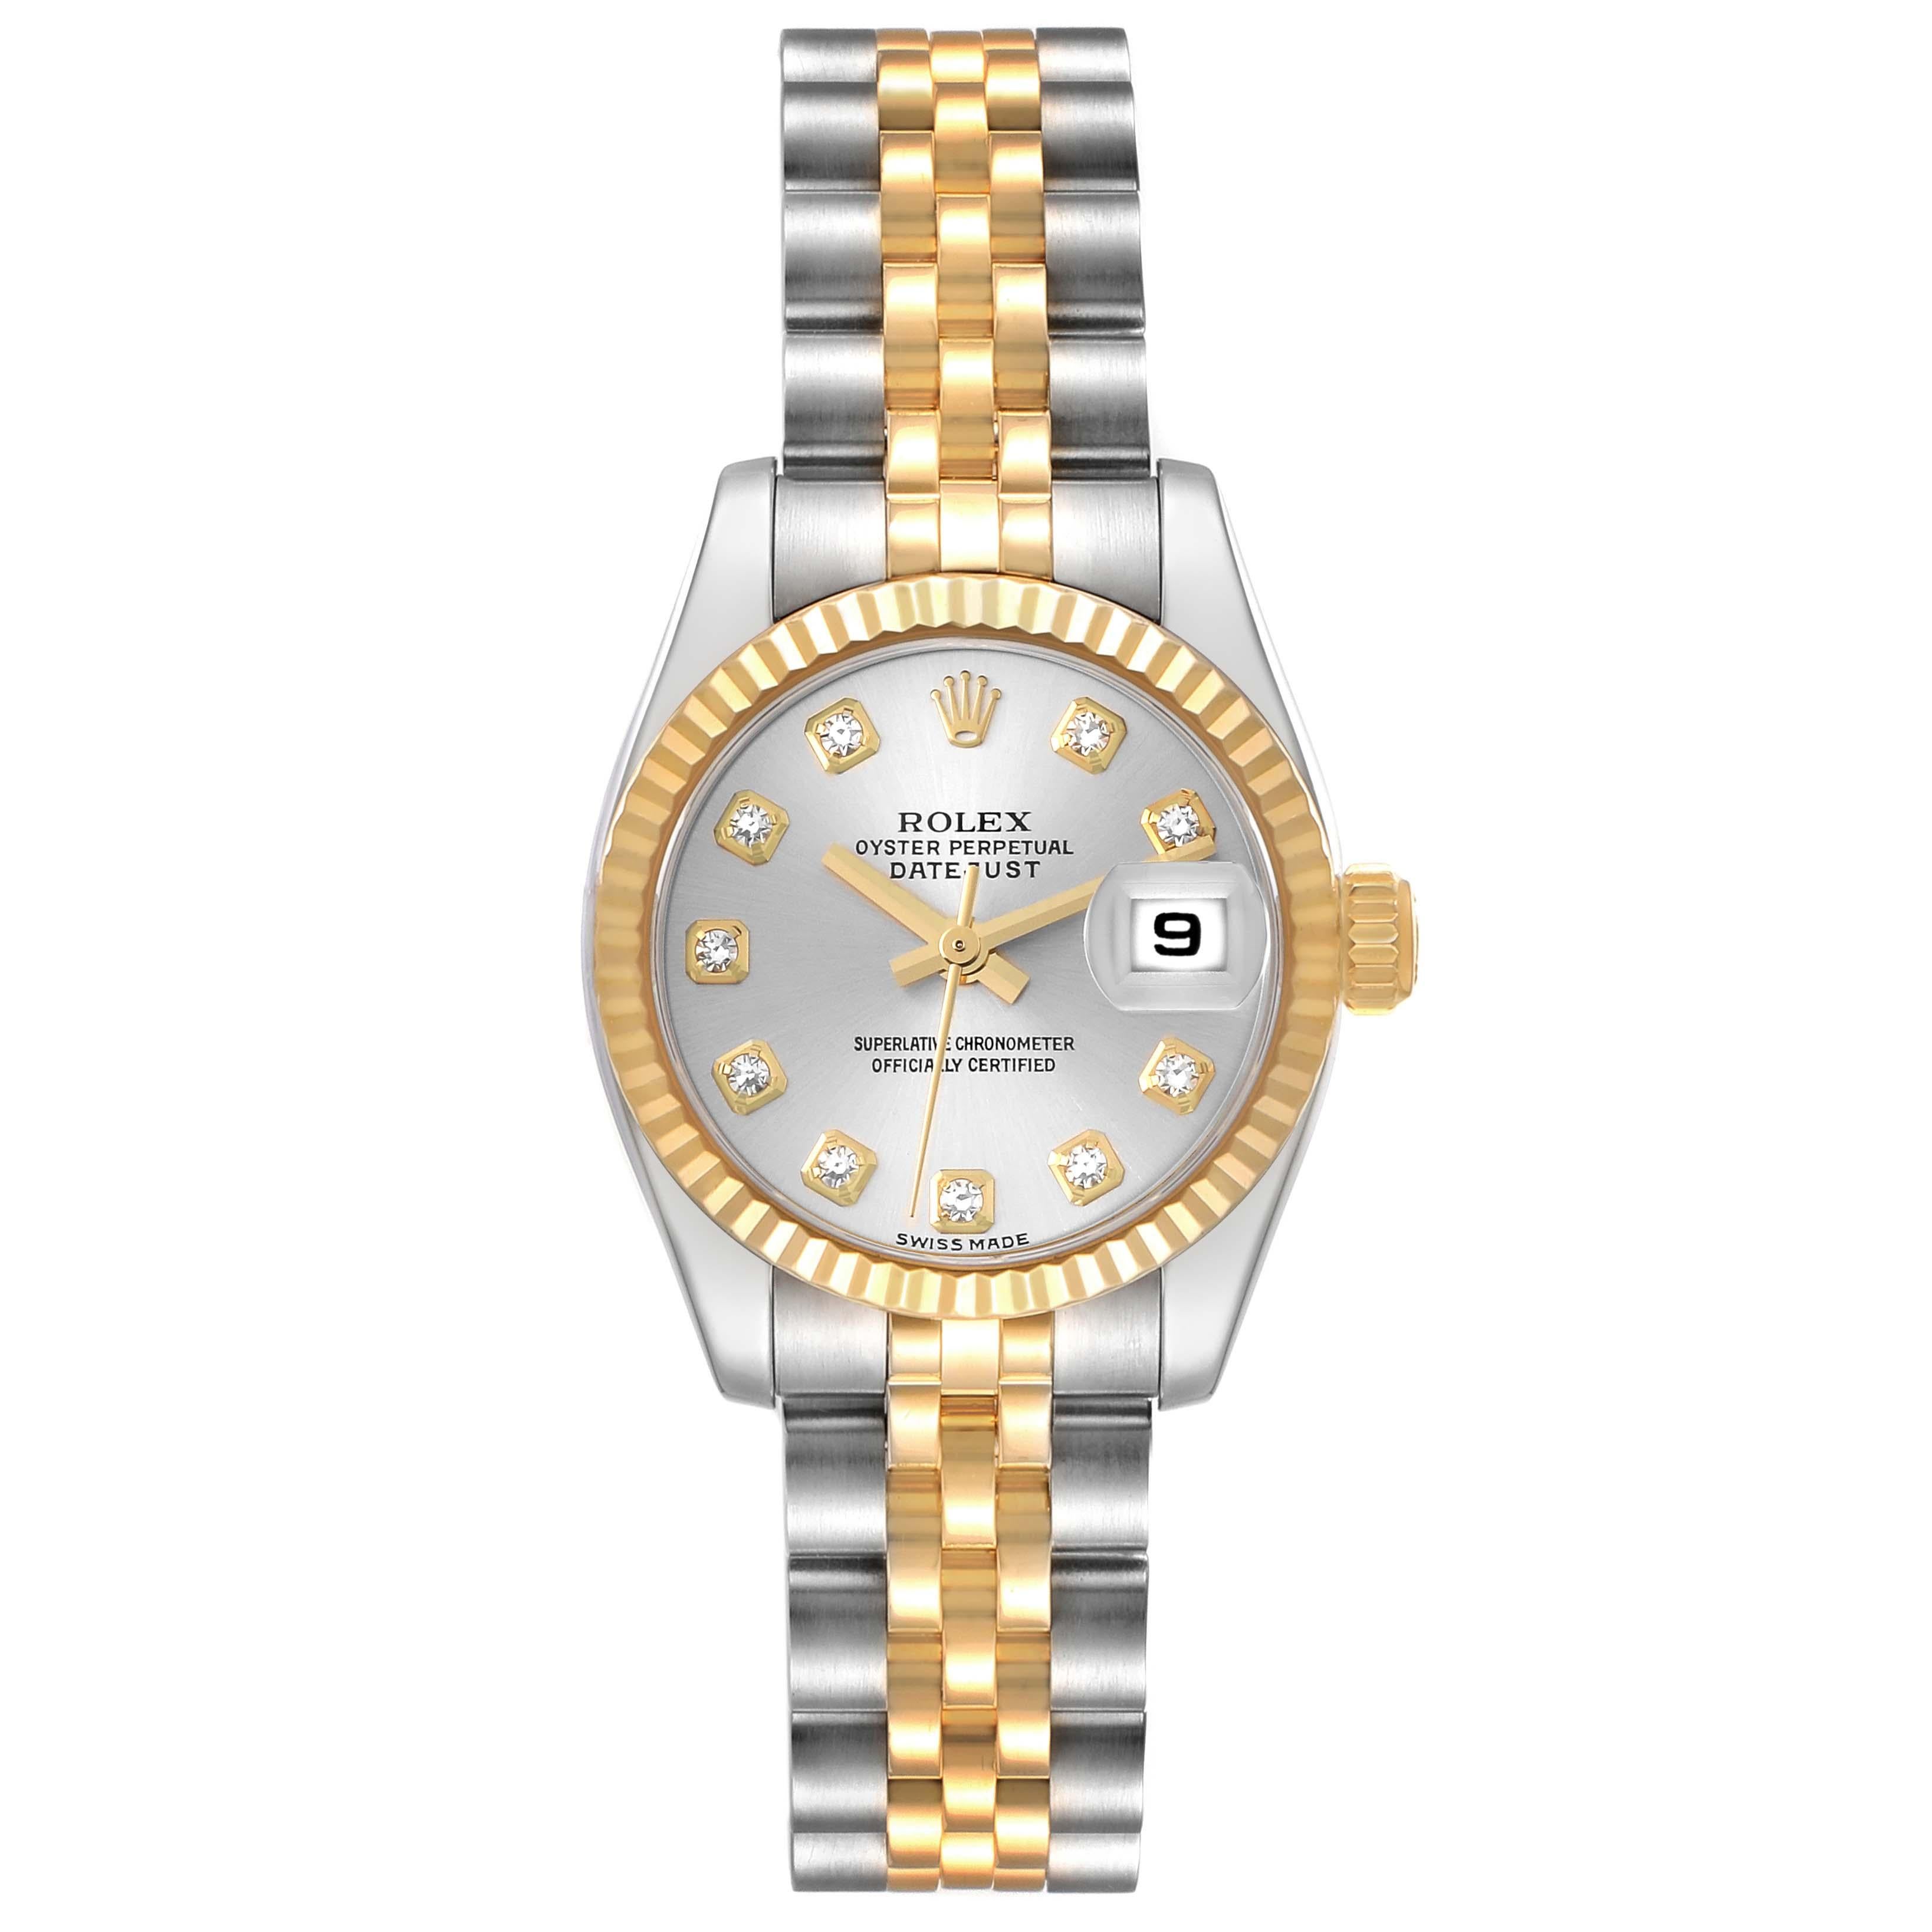 Rolex Datejust 26 Steel Yellow Gold Diamond Dial Ladies Watch 179173 For Sale 7